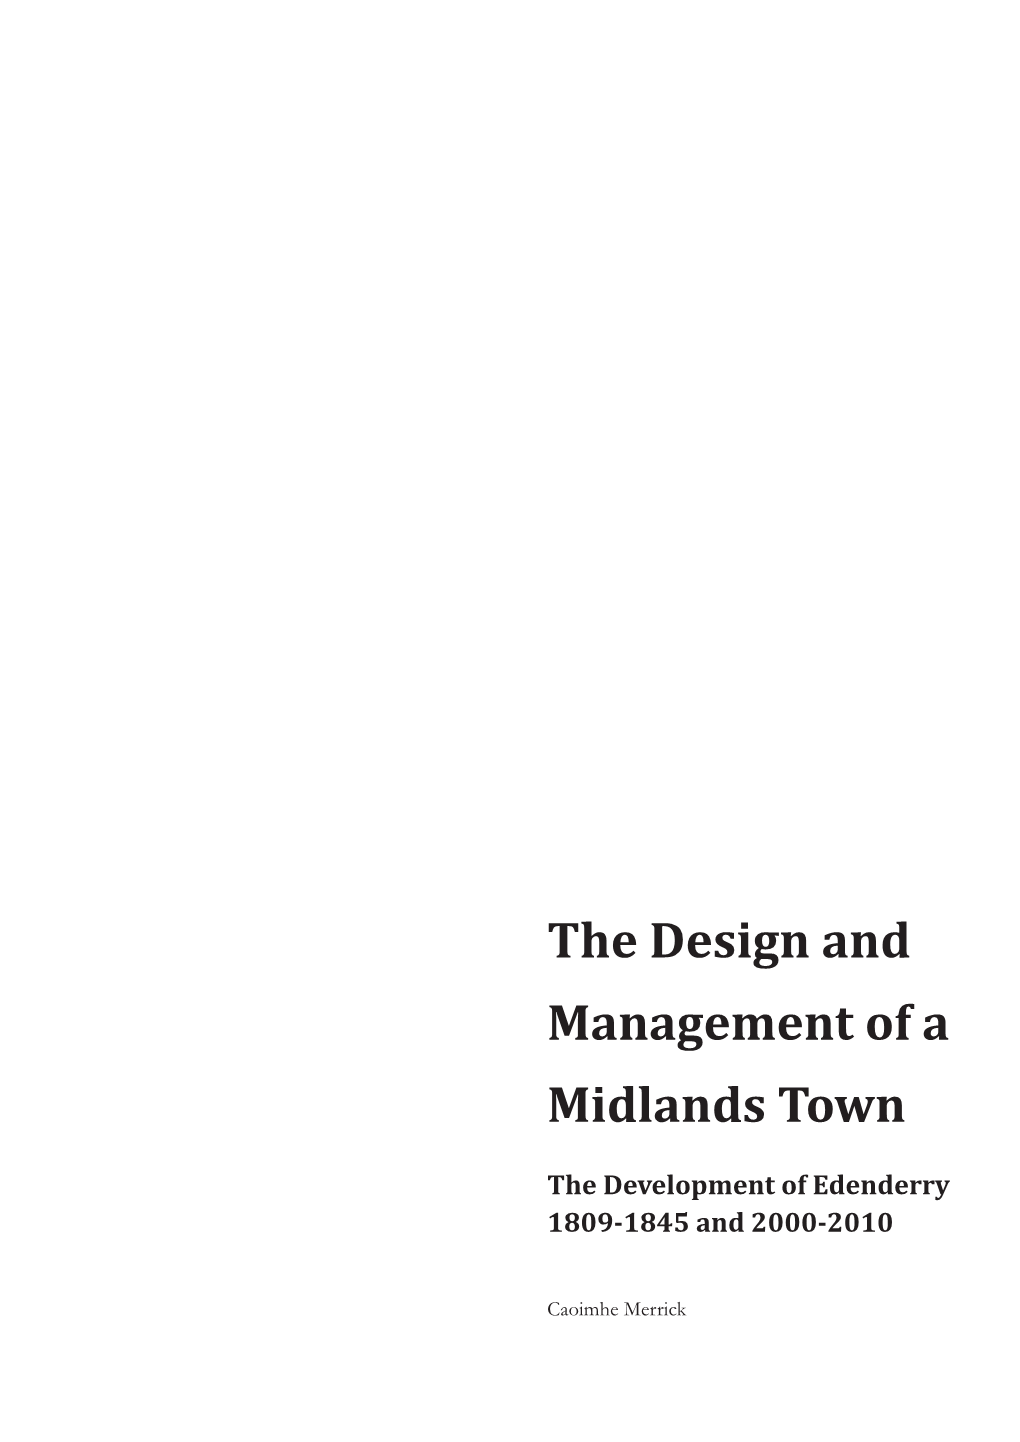 The Design and Management of a Midlands Town